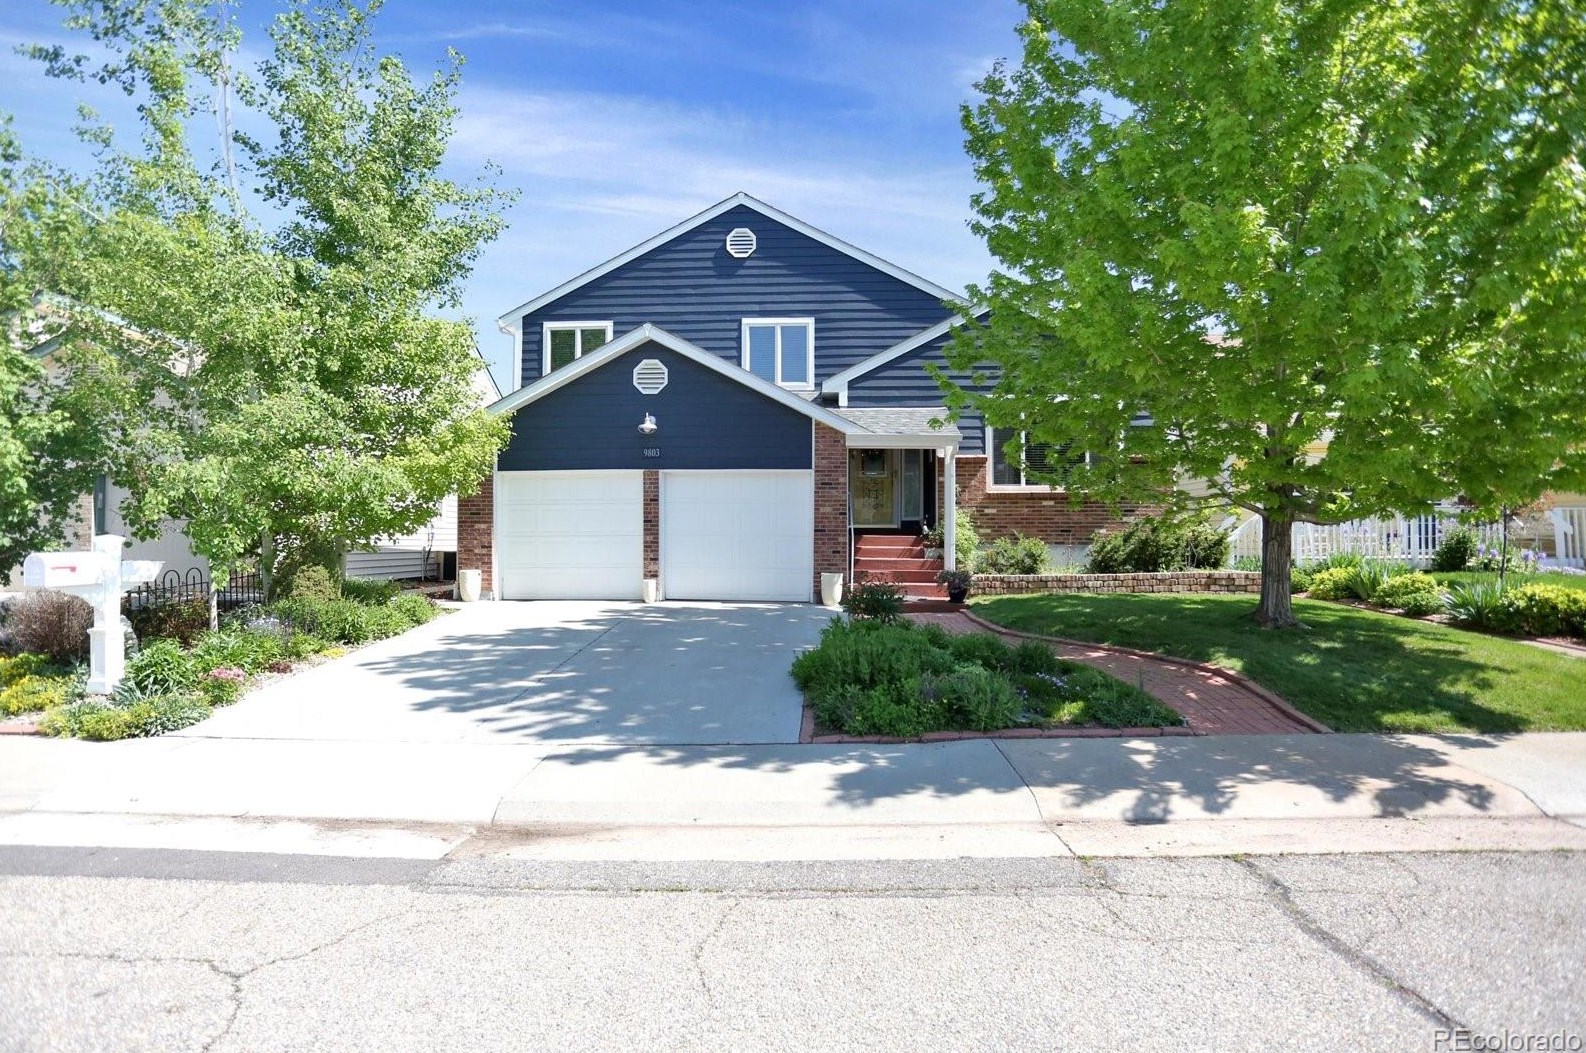 9803 83rd Ave, Arvada, CO 80005